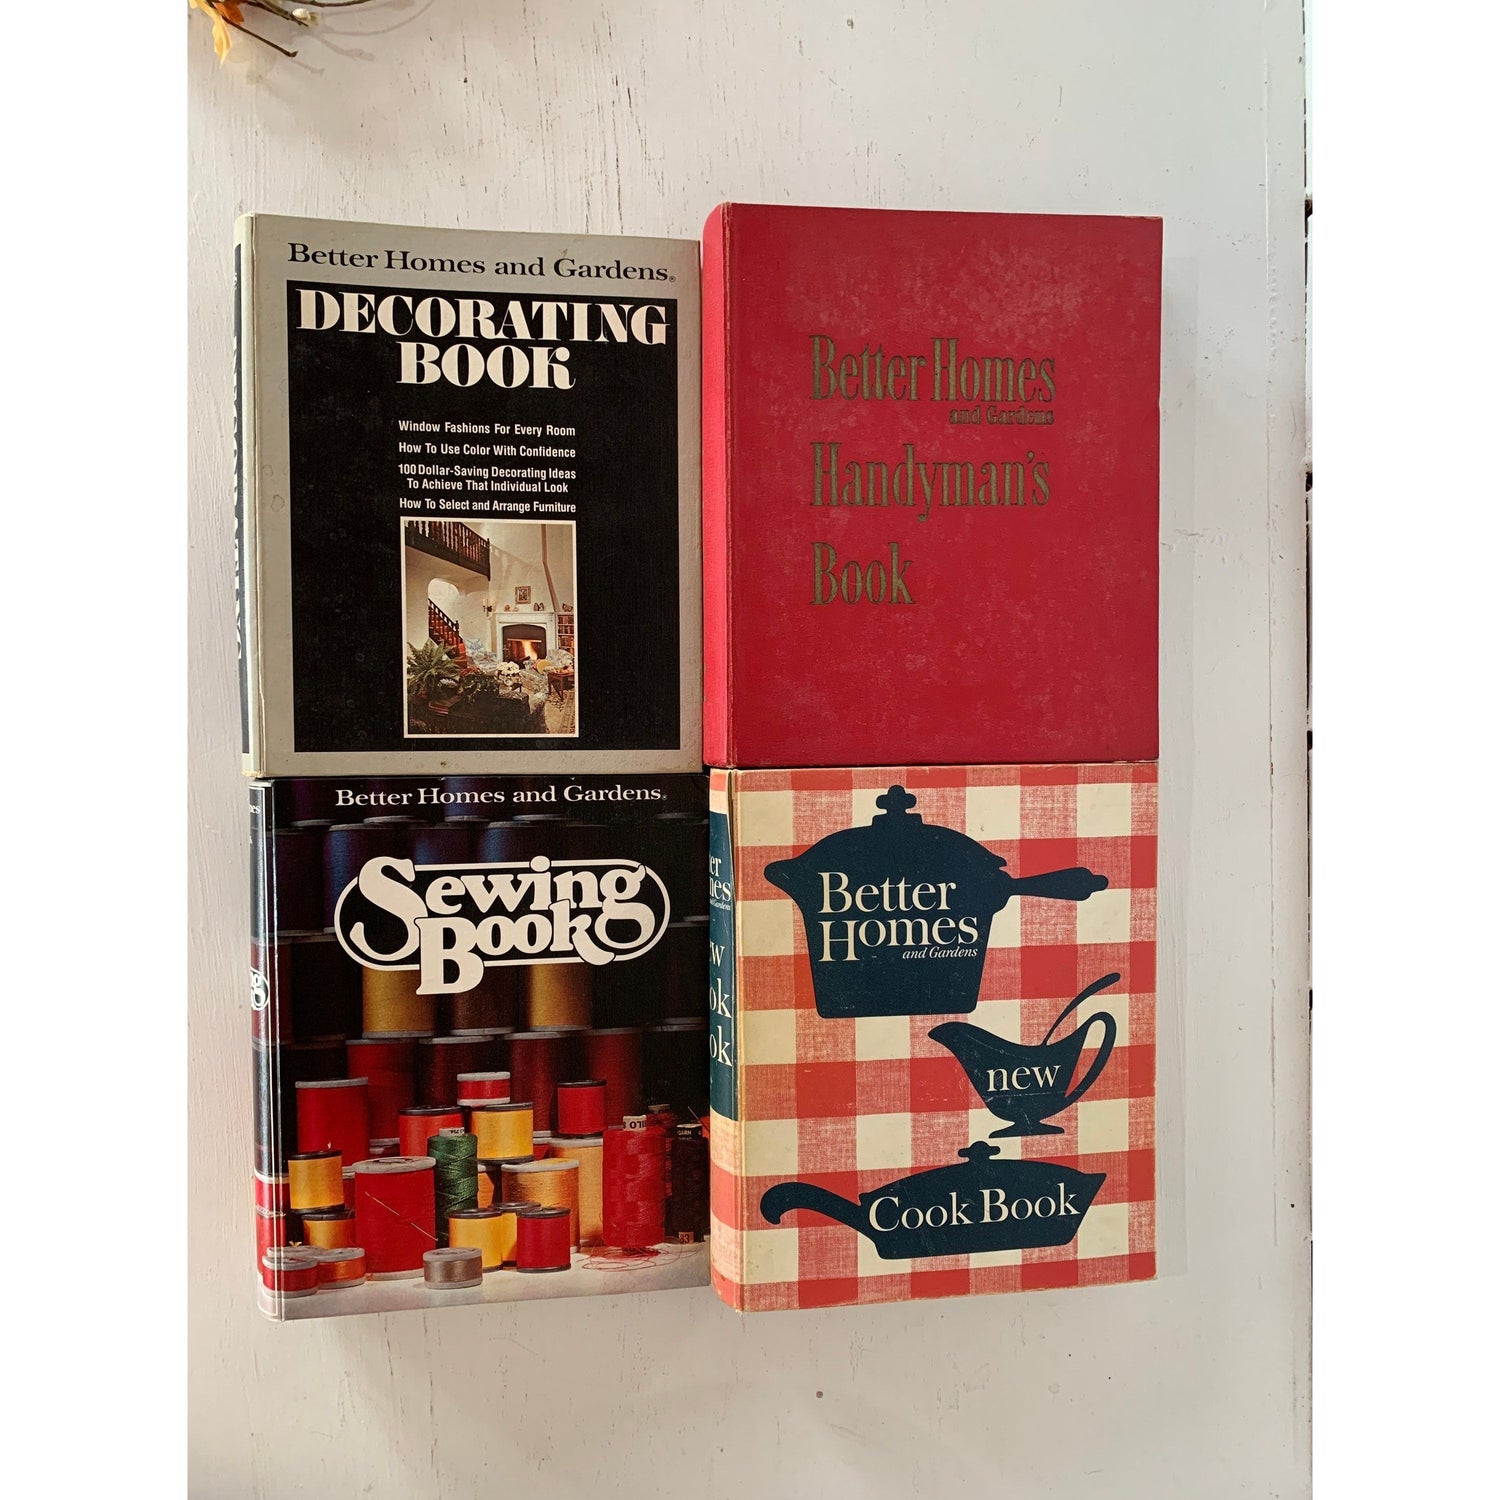 Better Homes and Gardens Binder Book Set, New Cook Book, Handyman Book, Decorating Book, Sewing Book